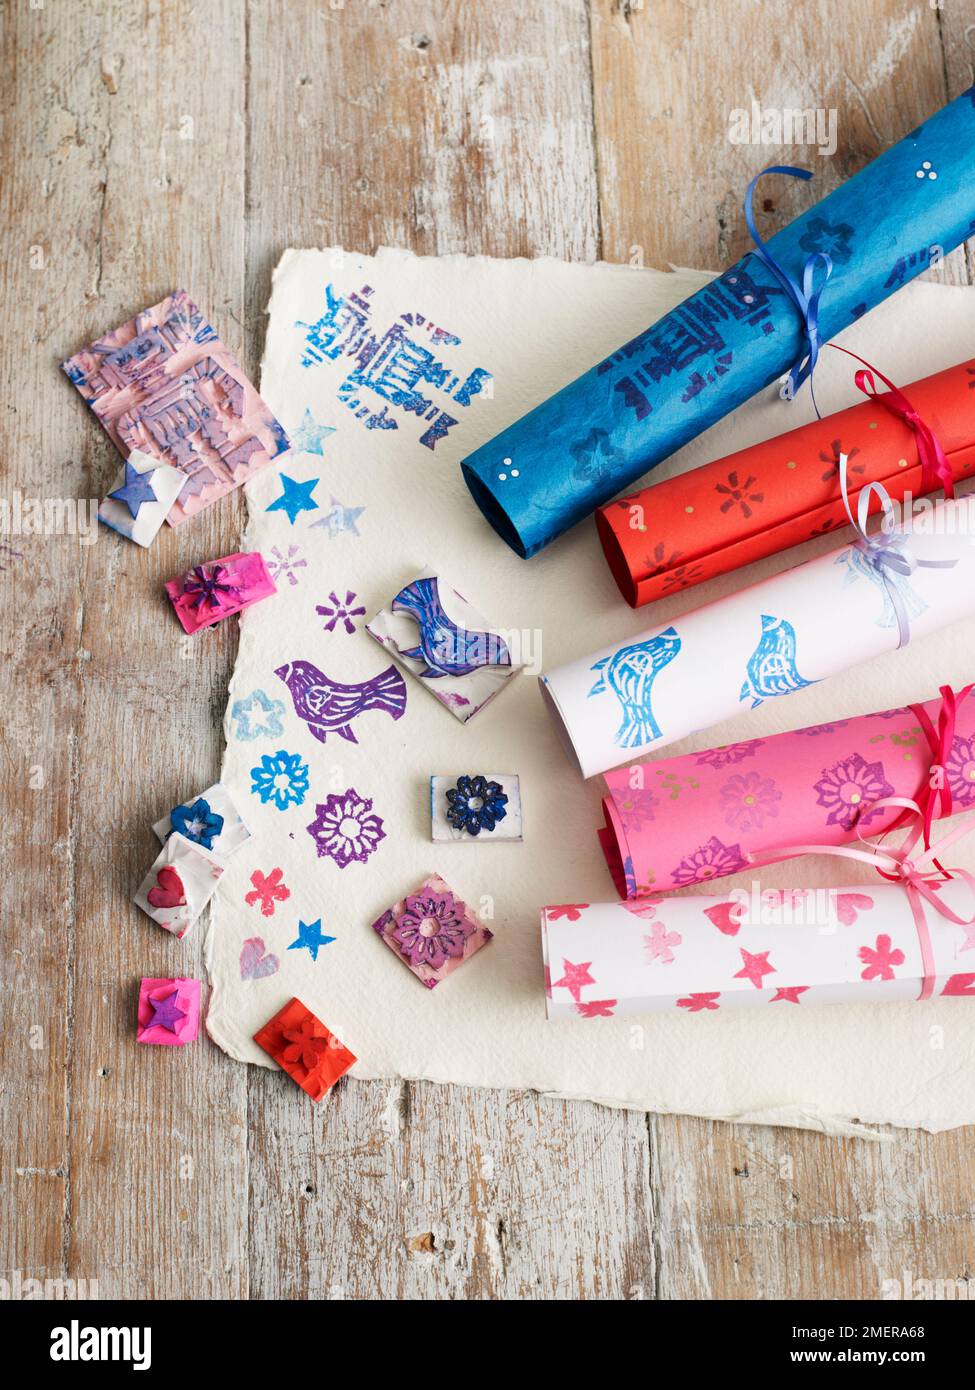 Selection of handmade patterned wrapping paper Stock Photo